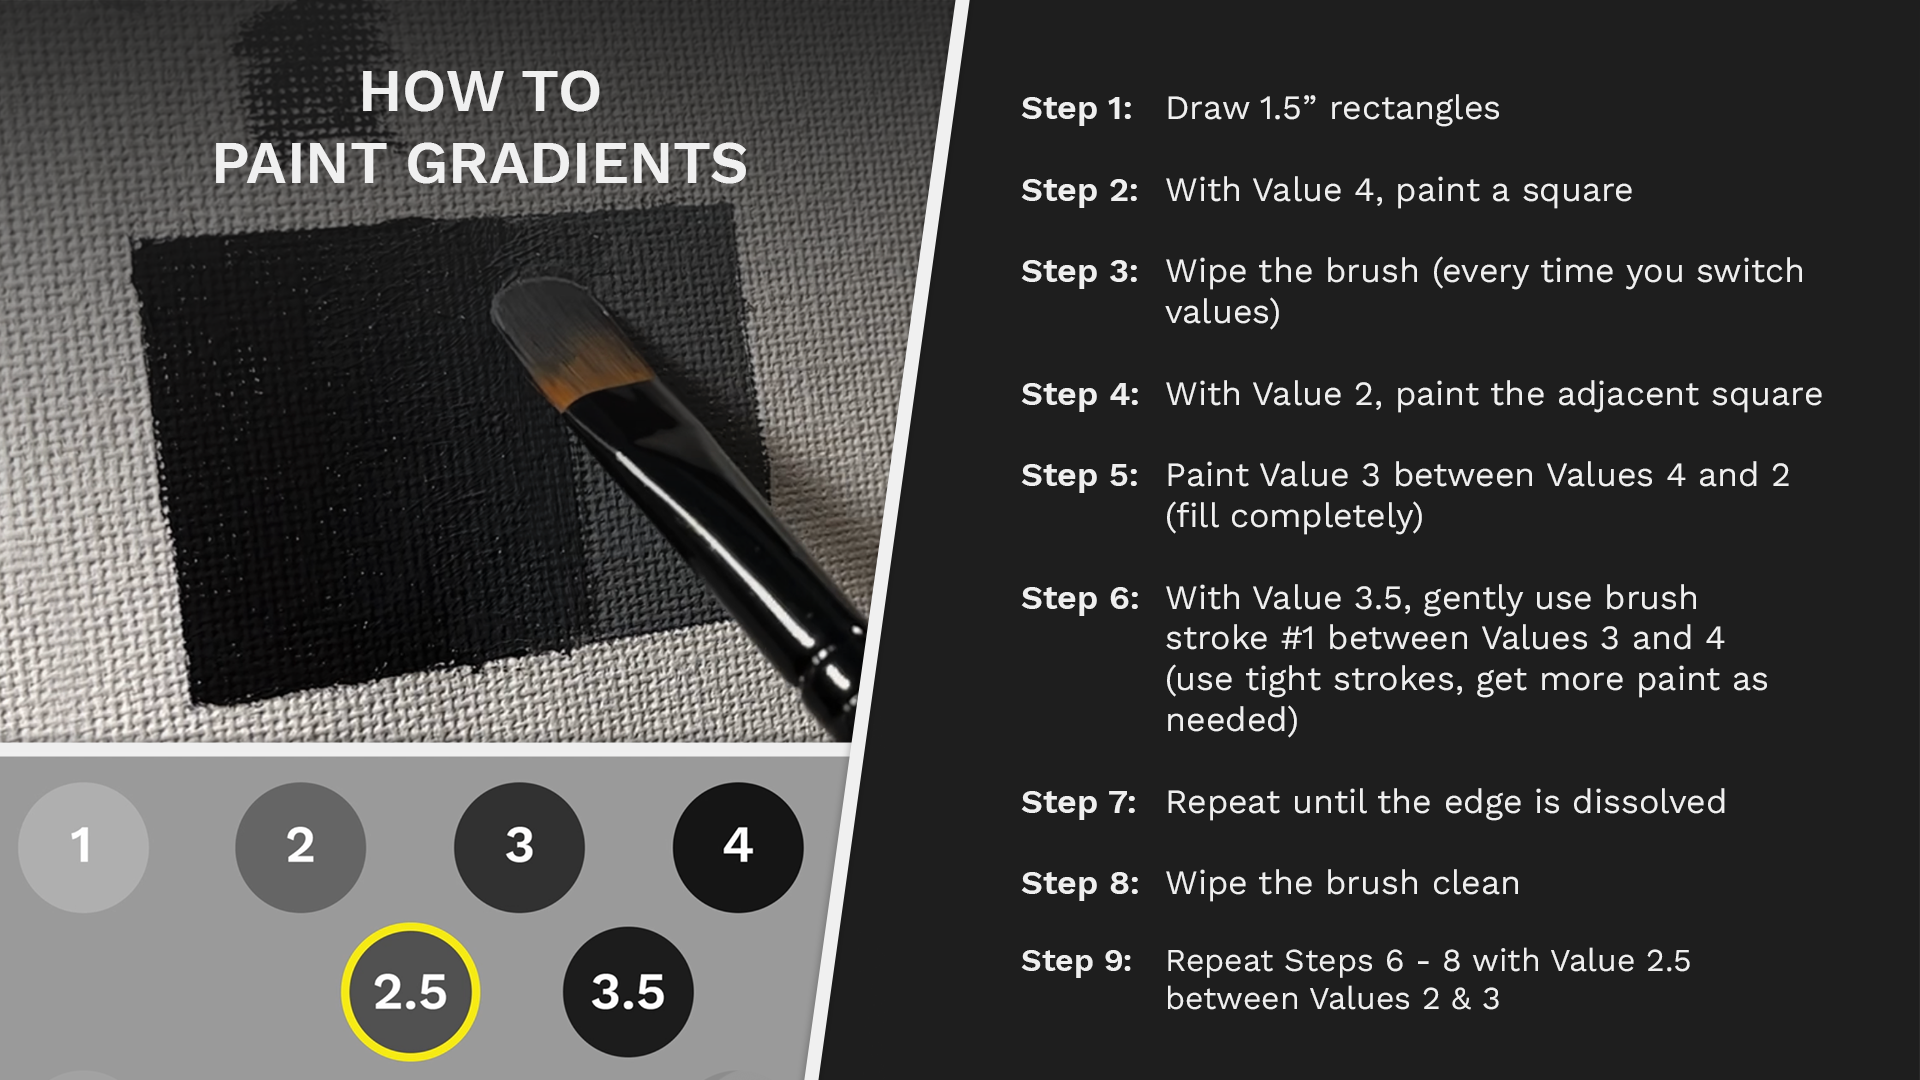 Follow these steps to learn how to make smooth gradients using oil paints.